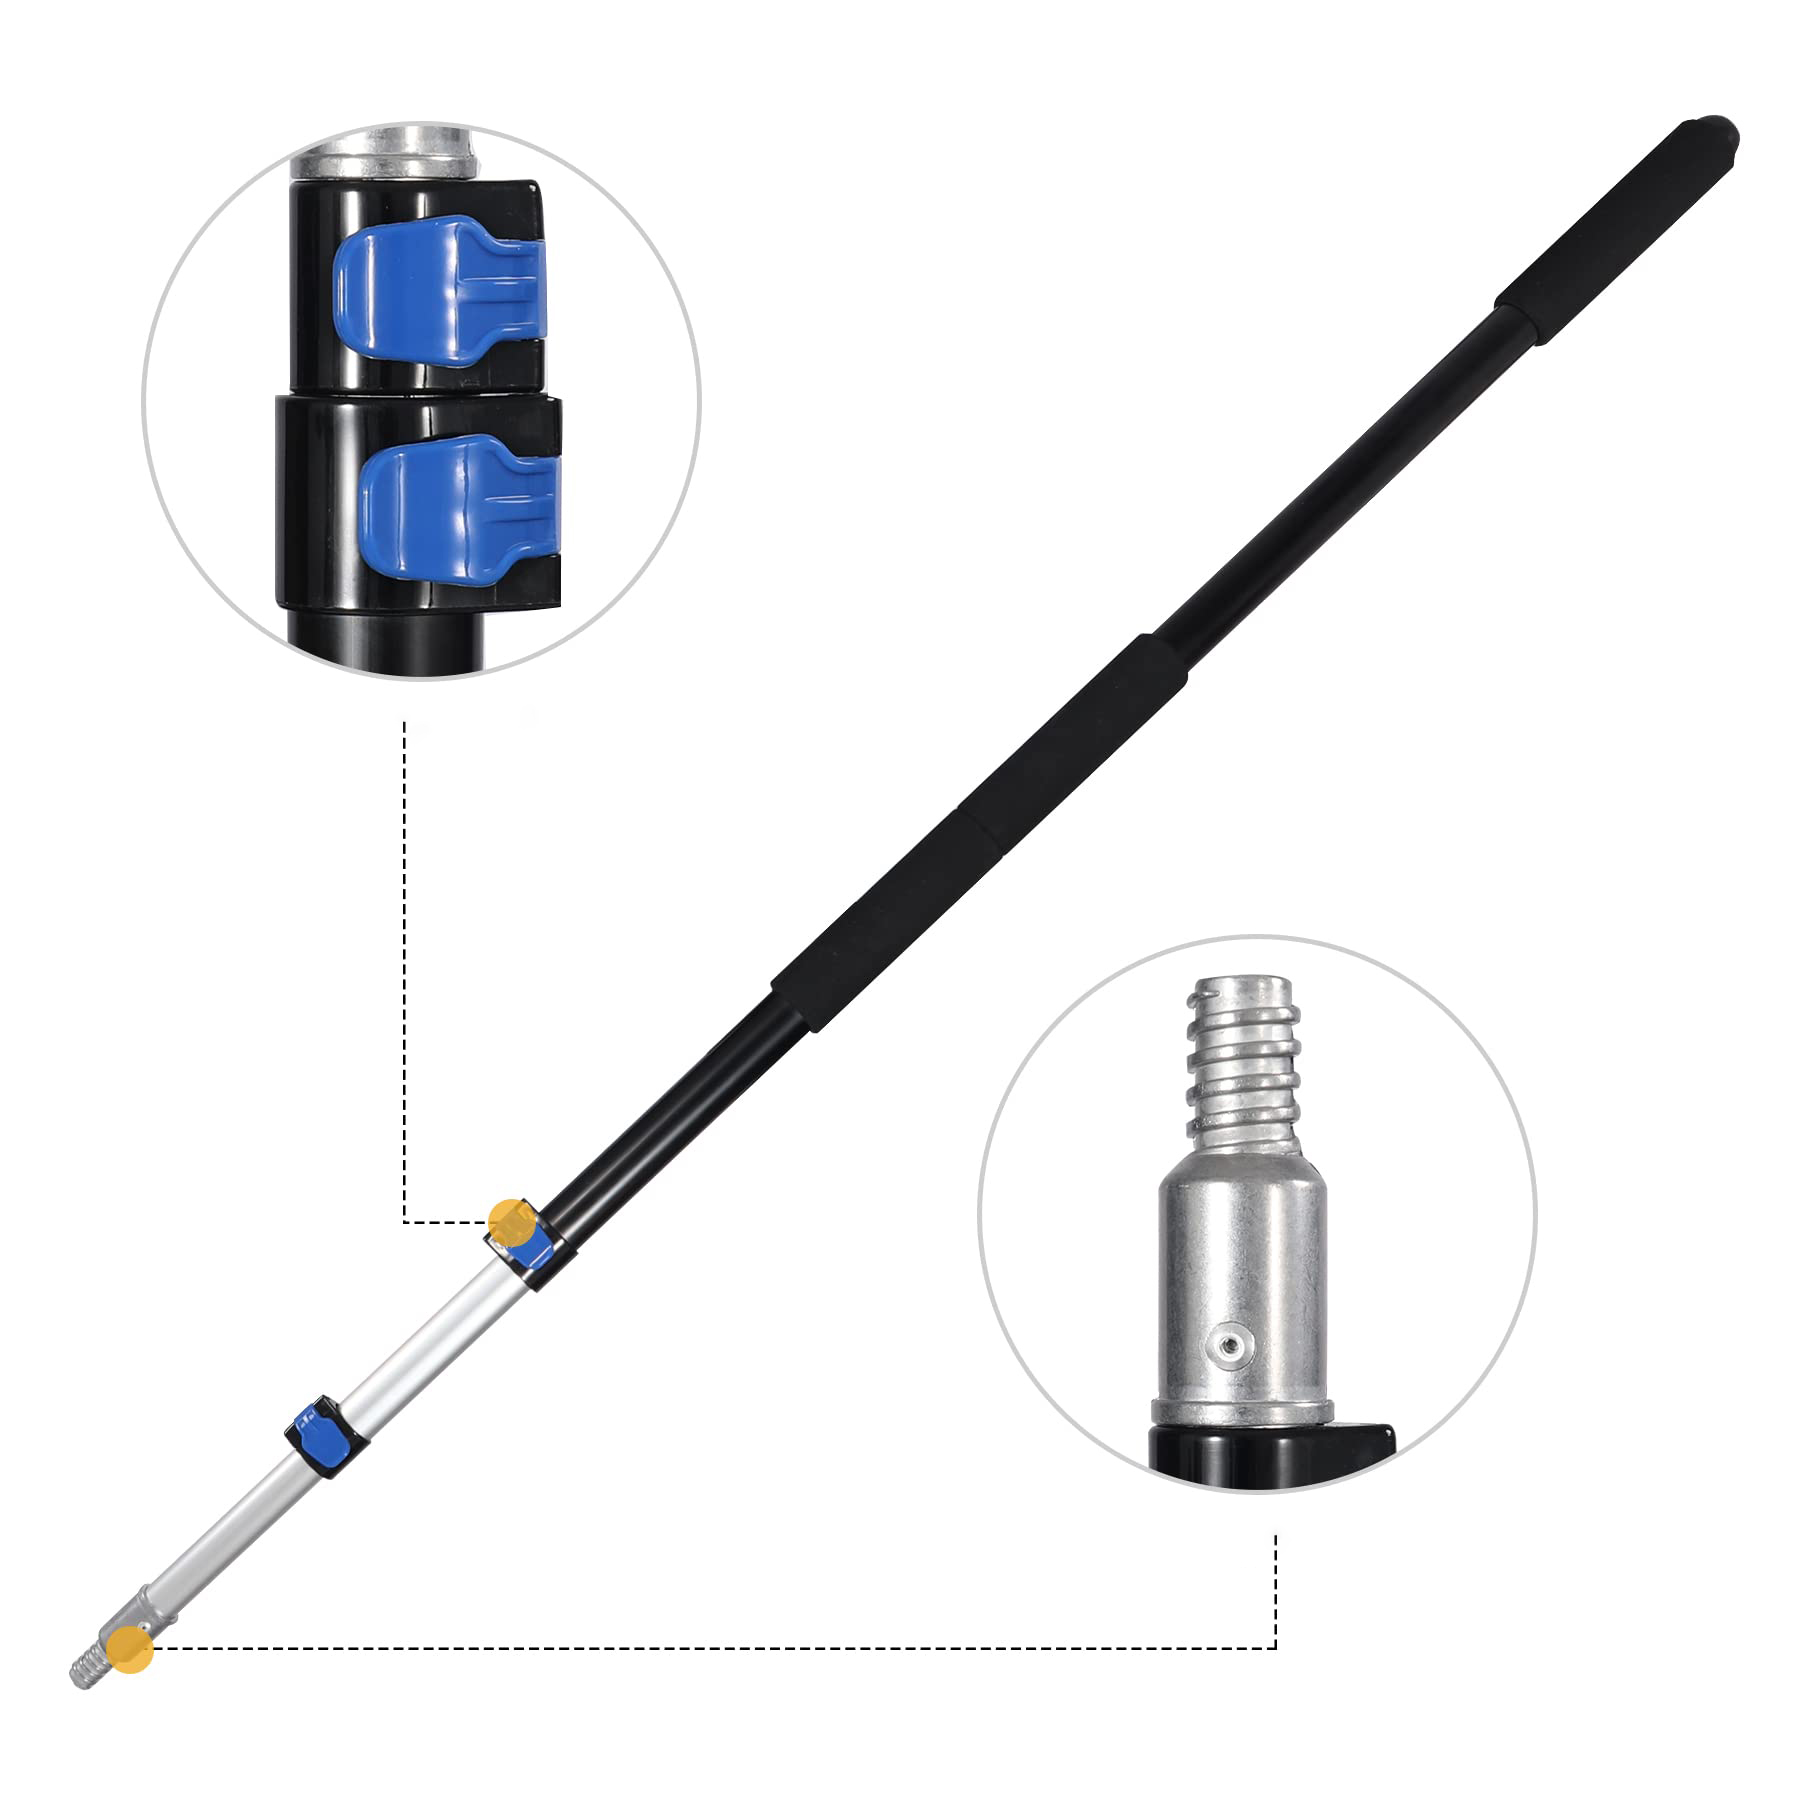 Customized Light Weight Aluminum Telescopic Pole with Flip Lock for Window Cleaning Tools